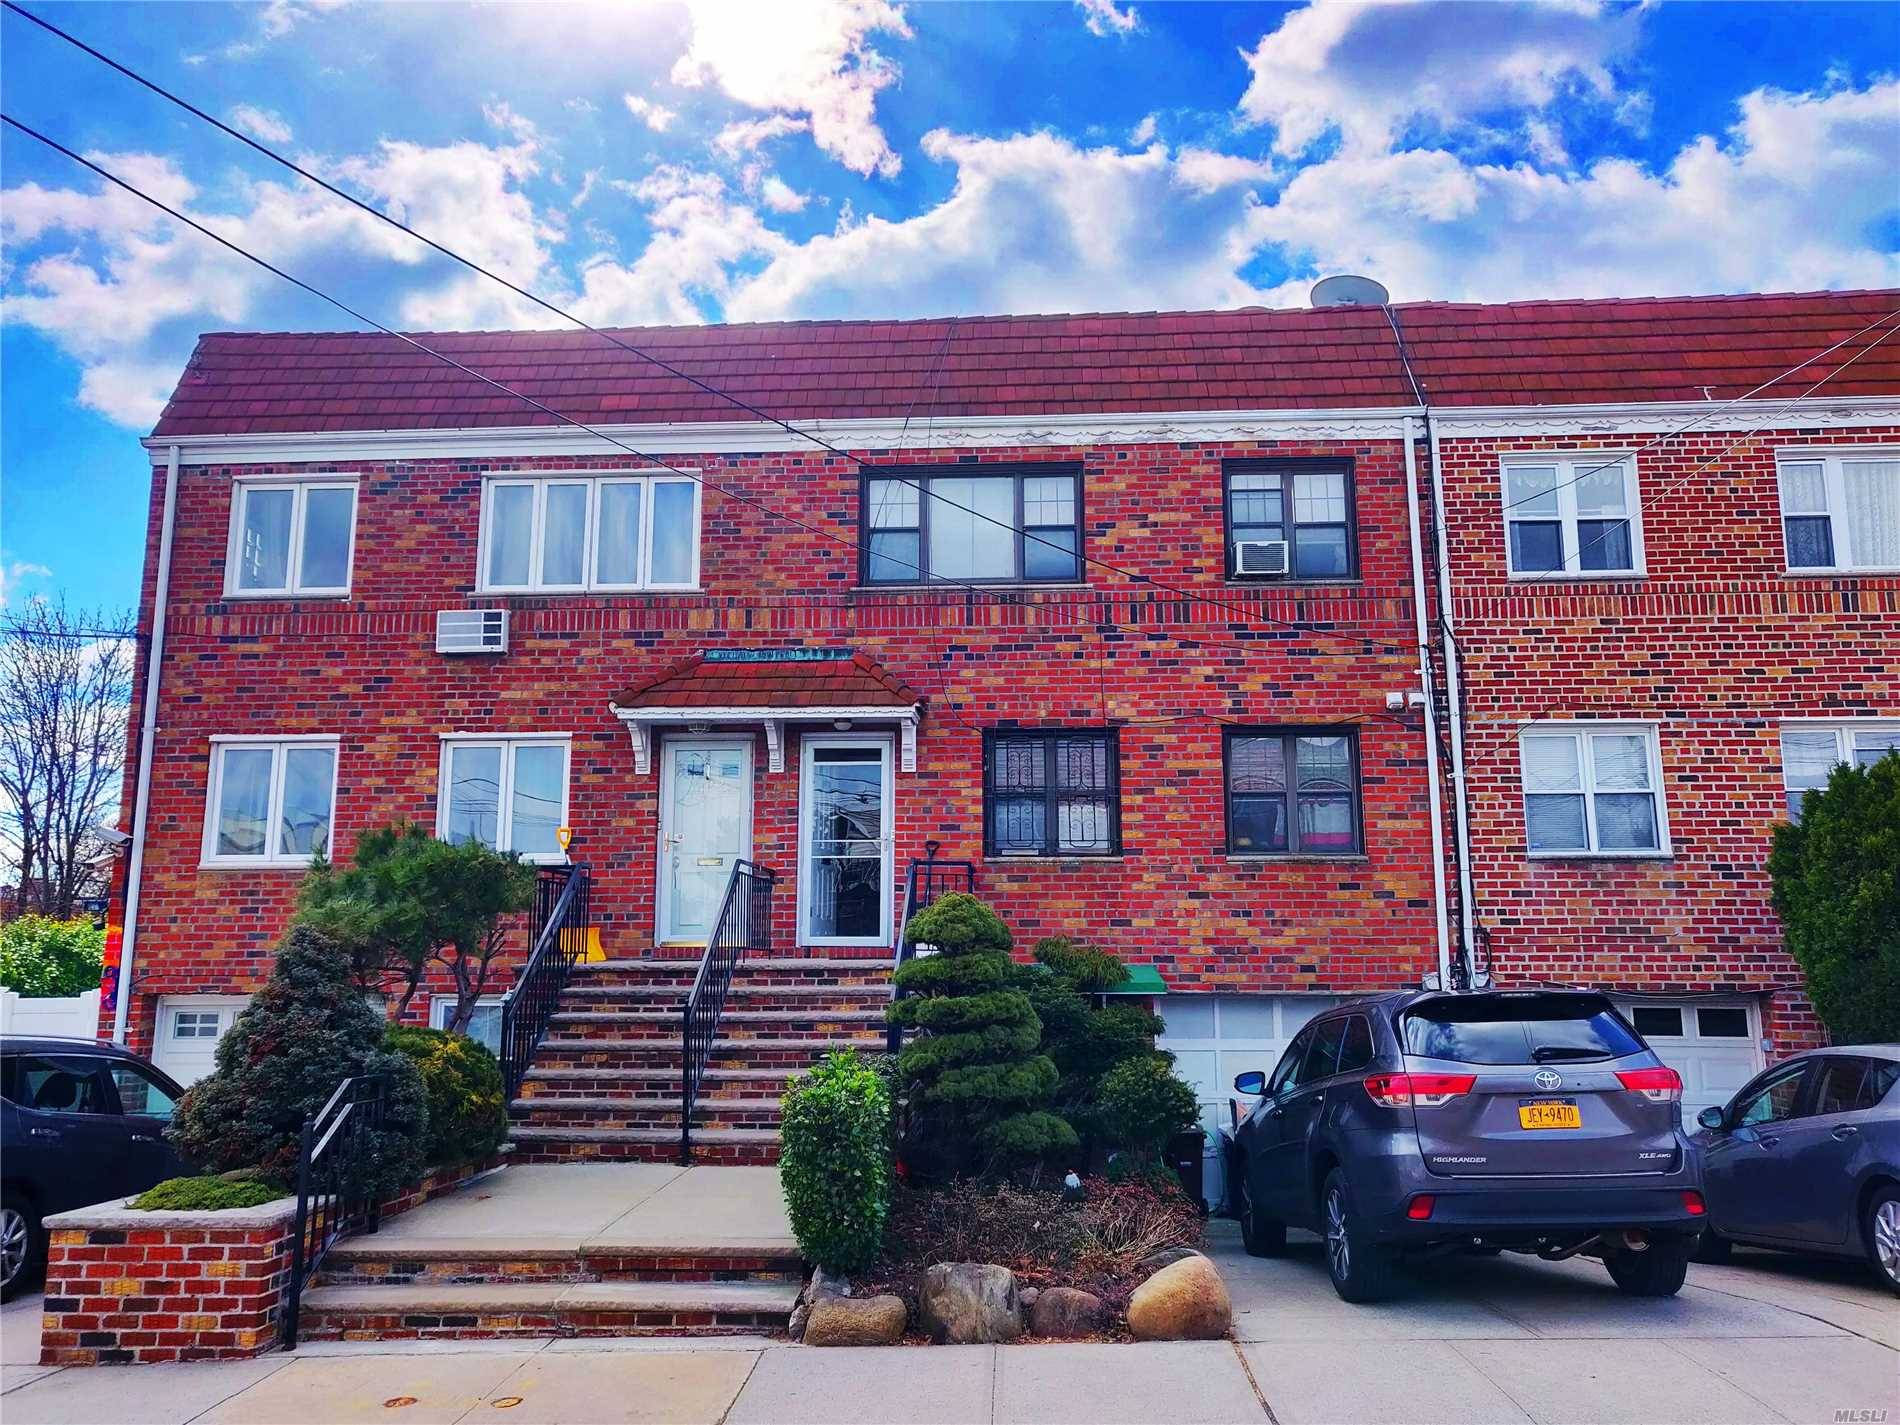 Sunny and cozy home. Superb location center of Maspeth, walk to buses Q18, Q47, near P.